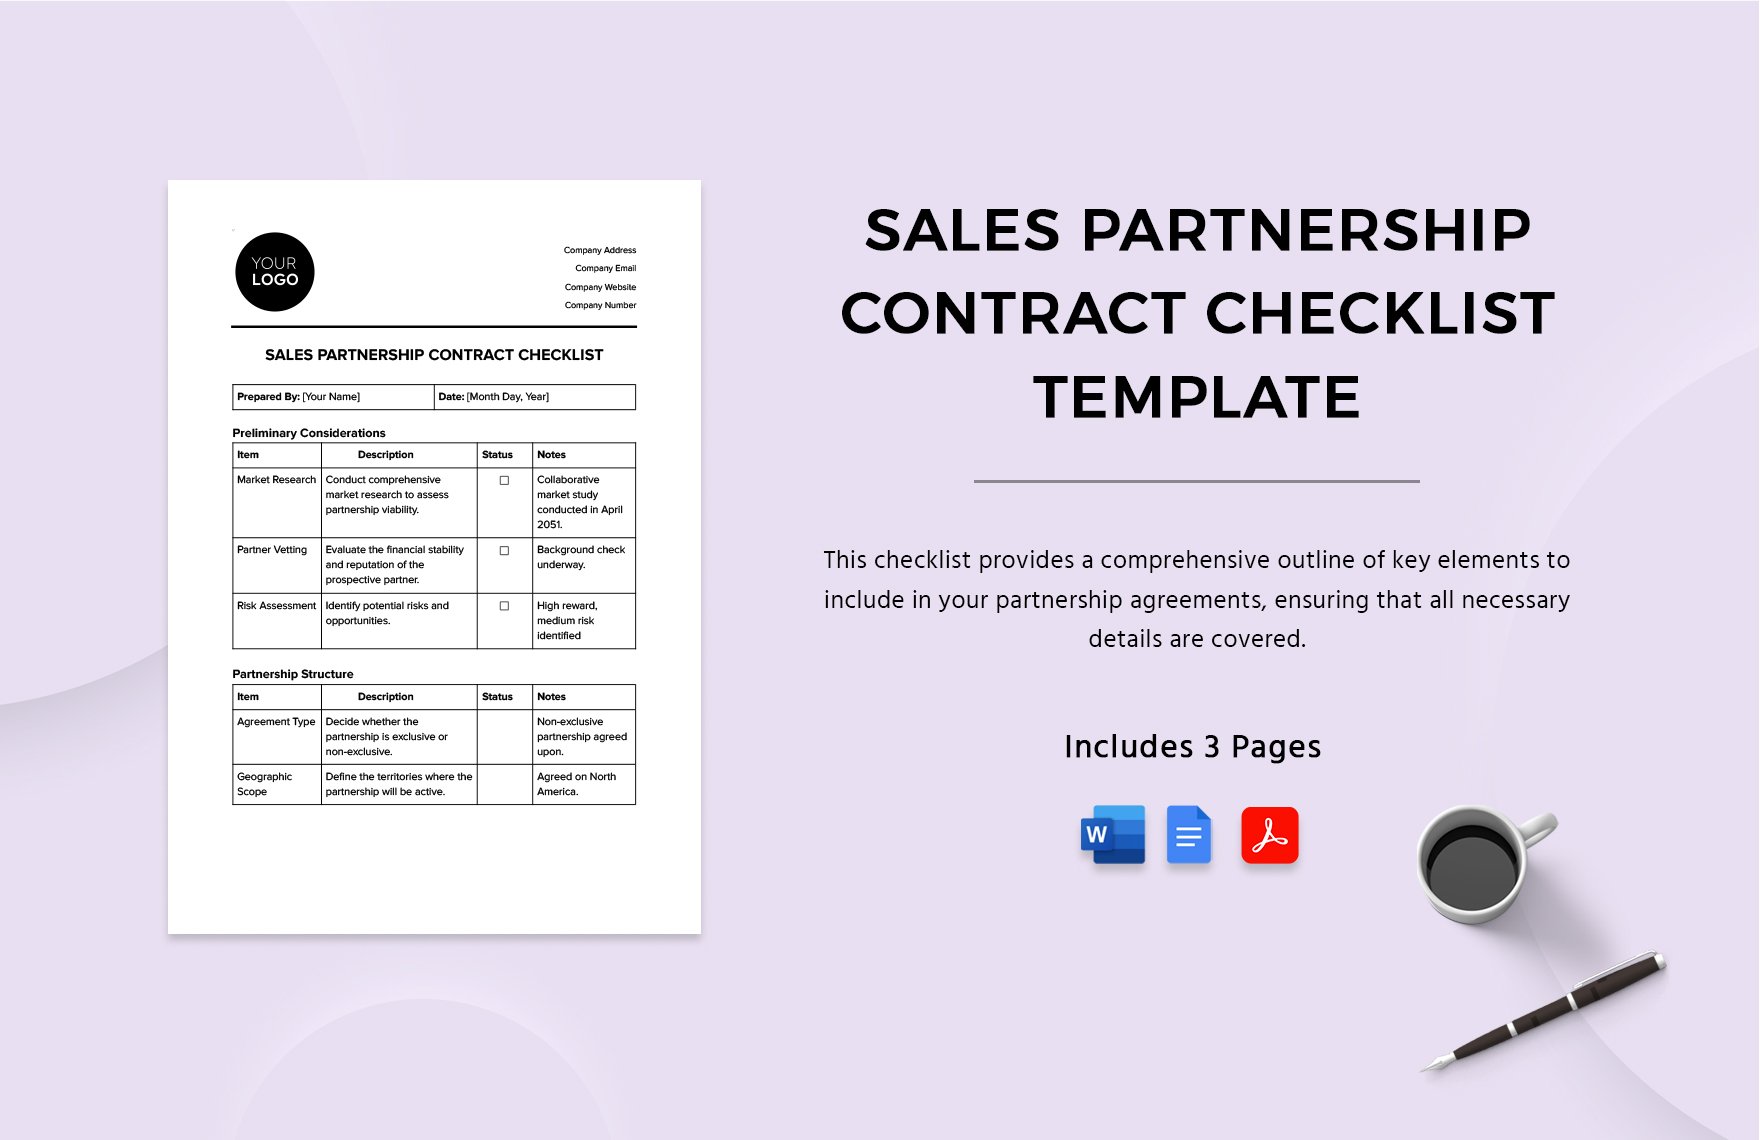 Sales Partnership Contract Checklist Template